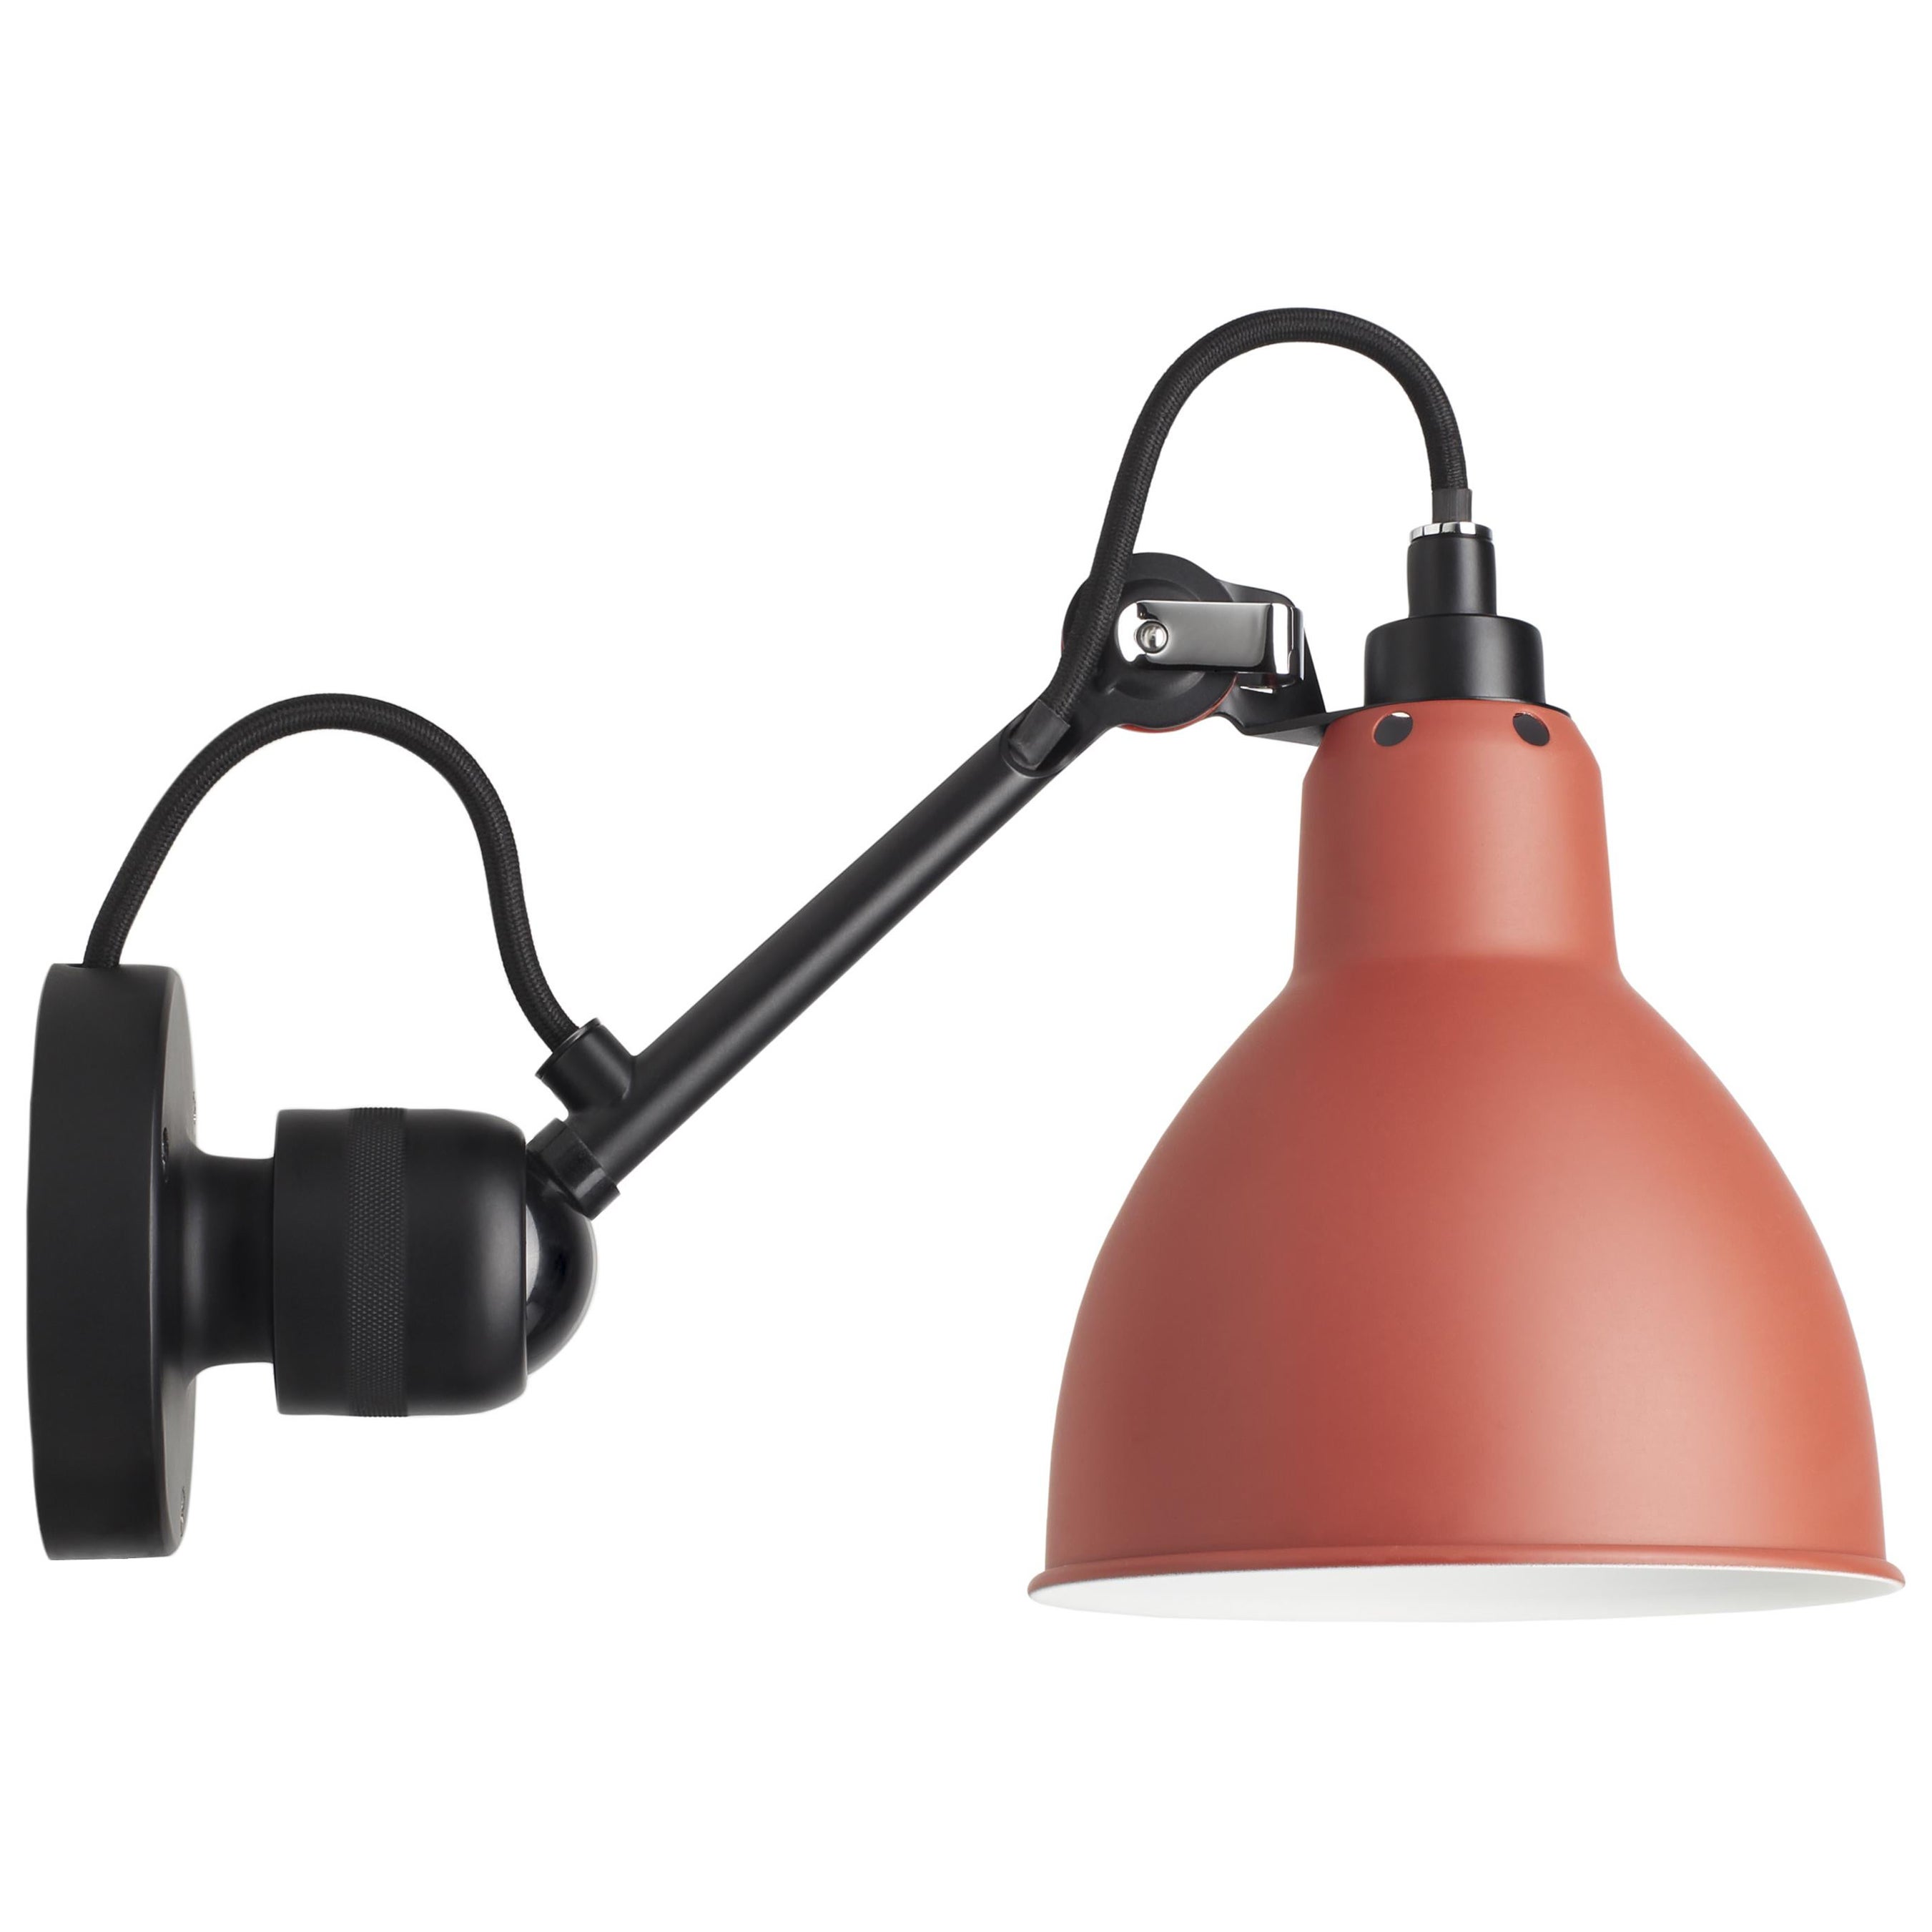 DCW Editions La Lampe Gras N°304 CA Wall Lamp in Black Arm and Red Shade For Sale